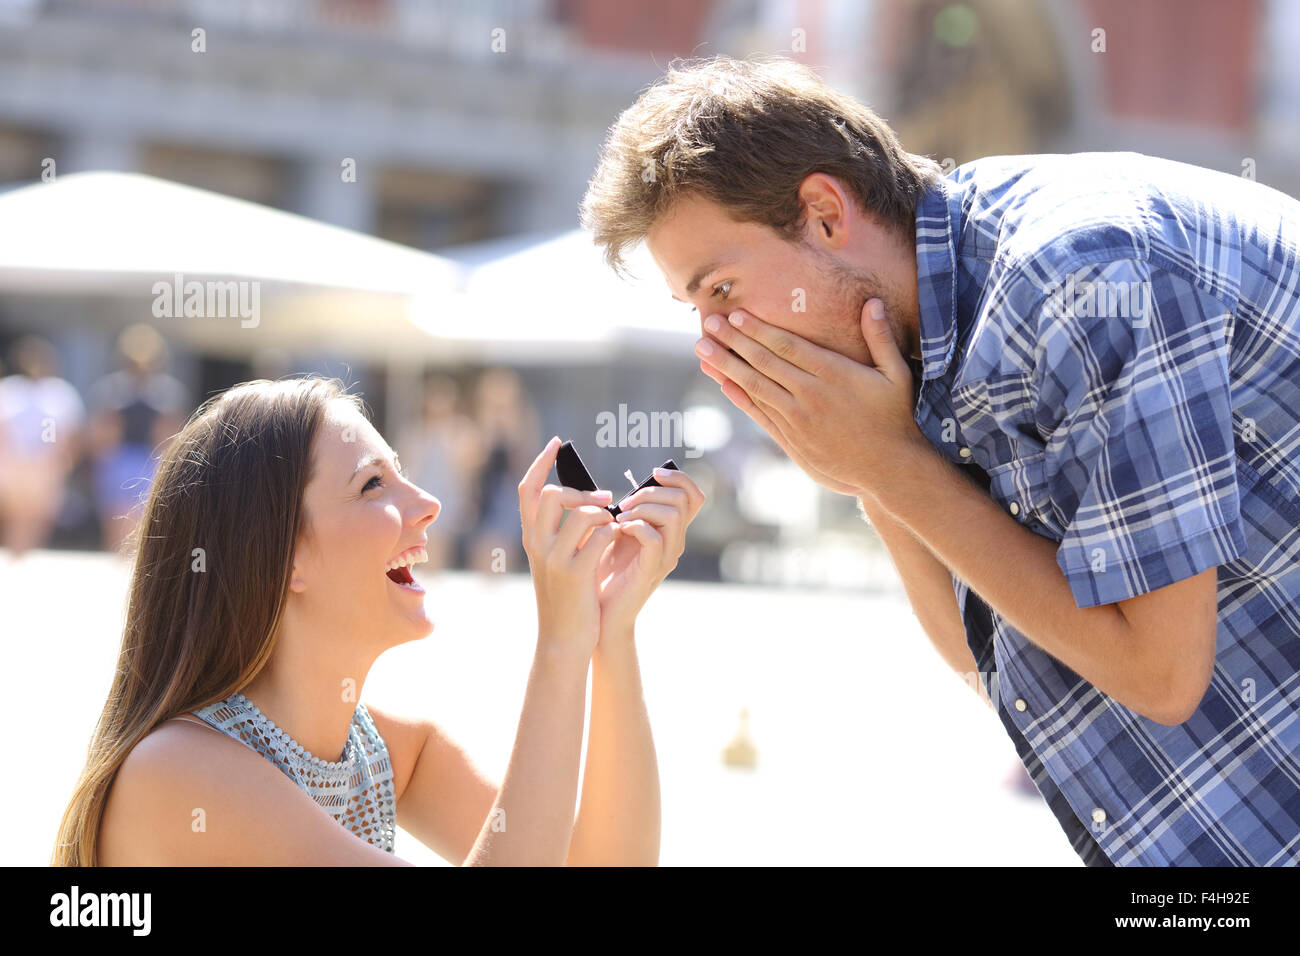 Proposal of a woman asking marry to a man in the middle of a street Stock Photo